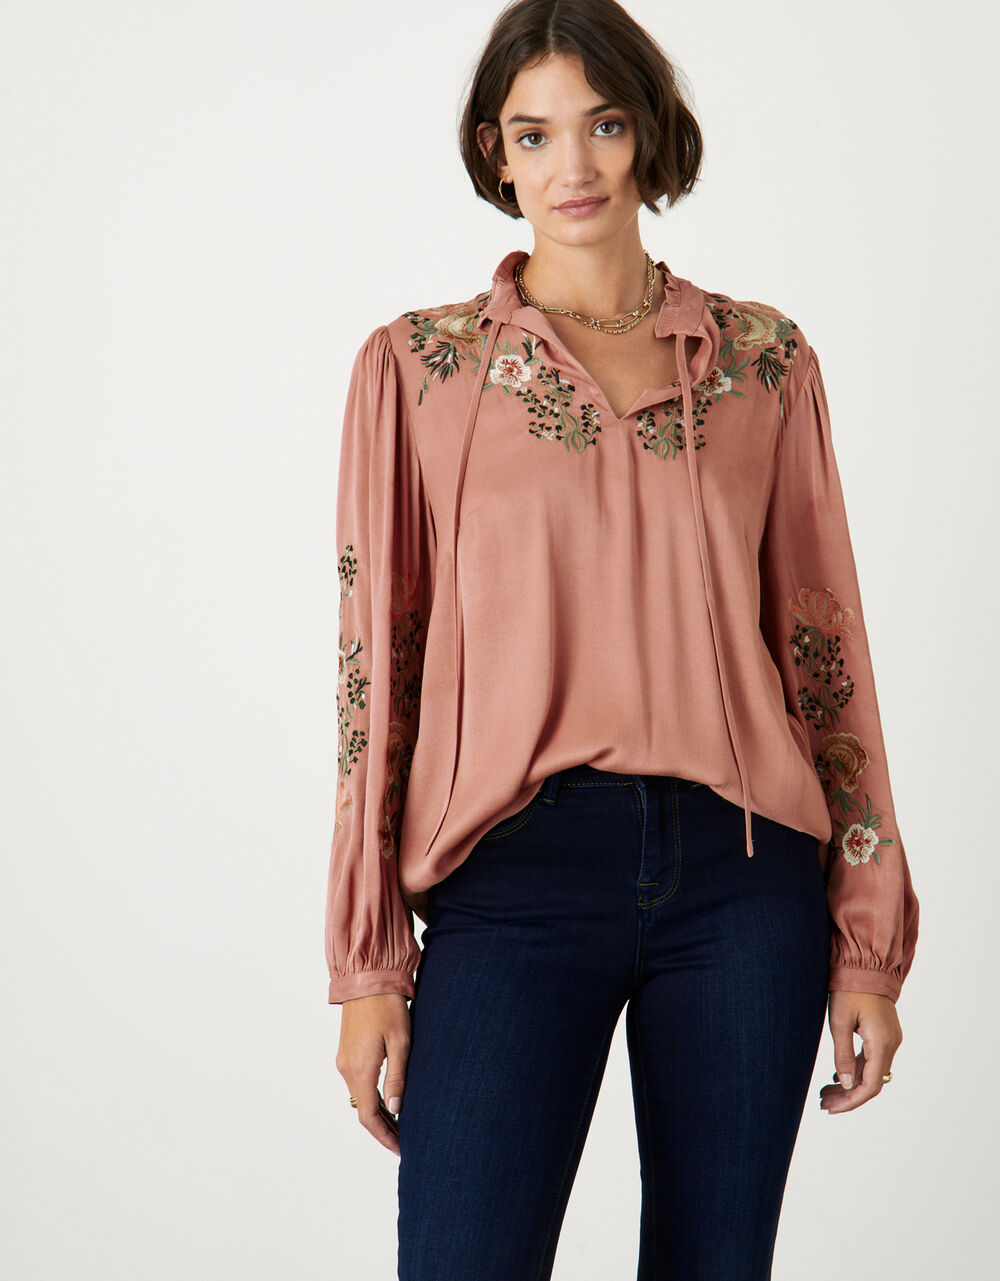 Embroidered Oriental Floral Long Back Top Orange | Tops & T-shirts ...